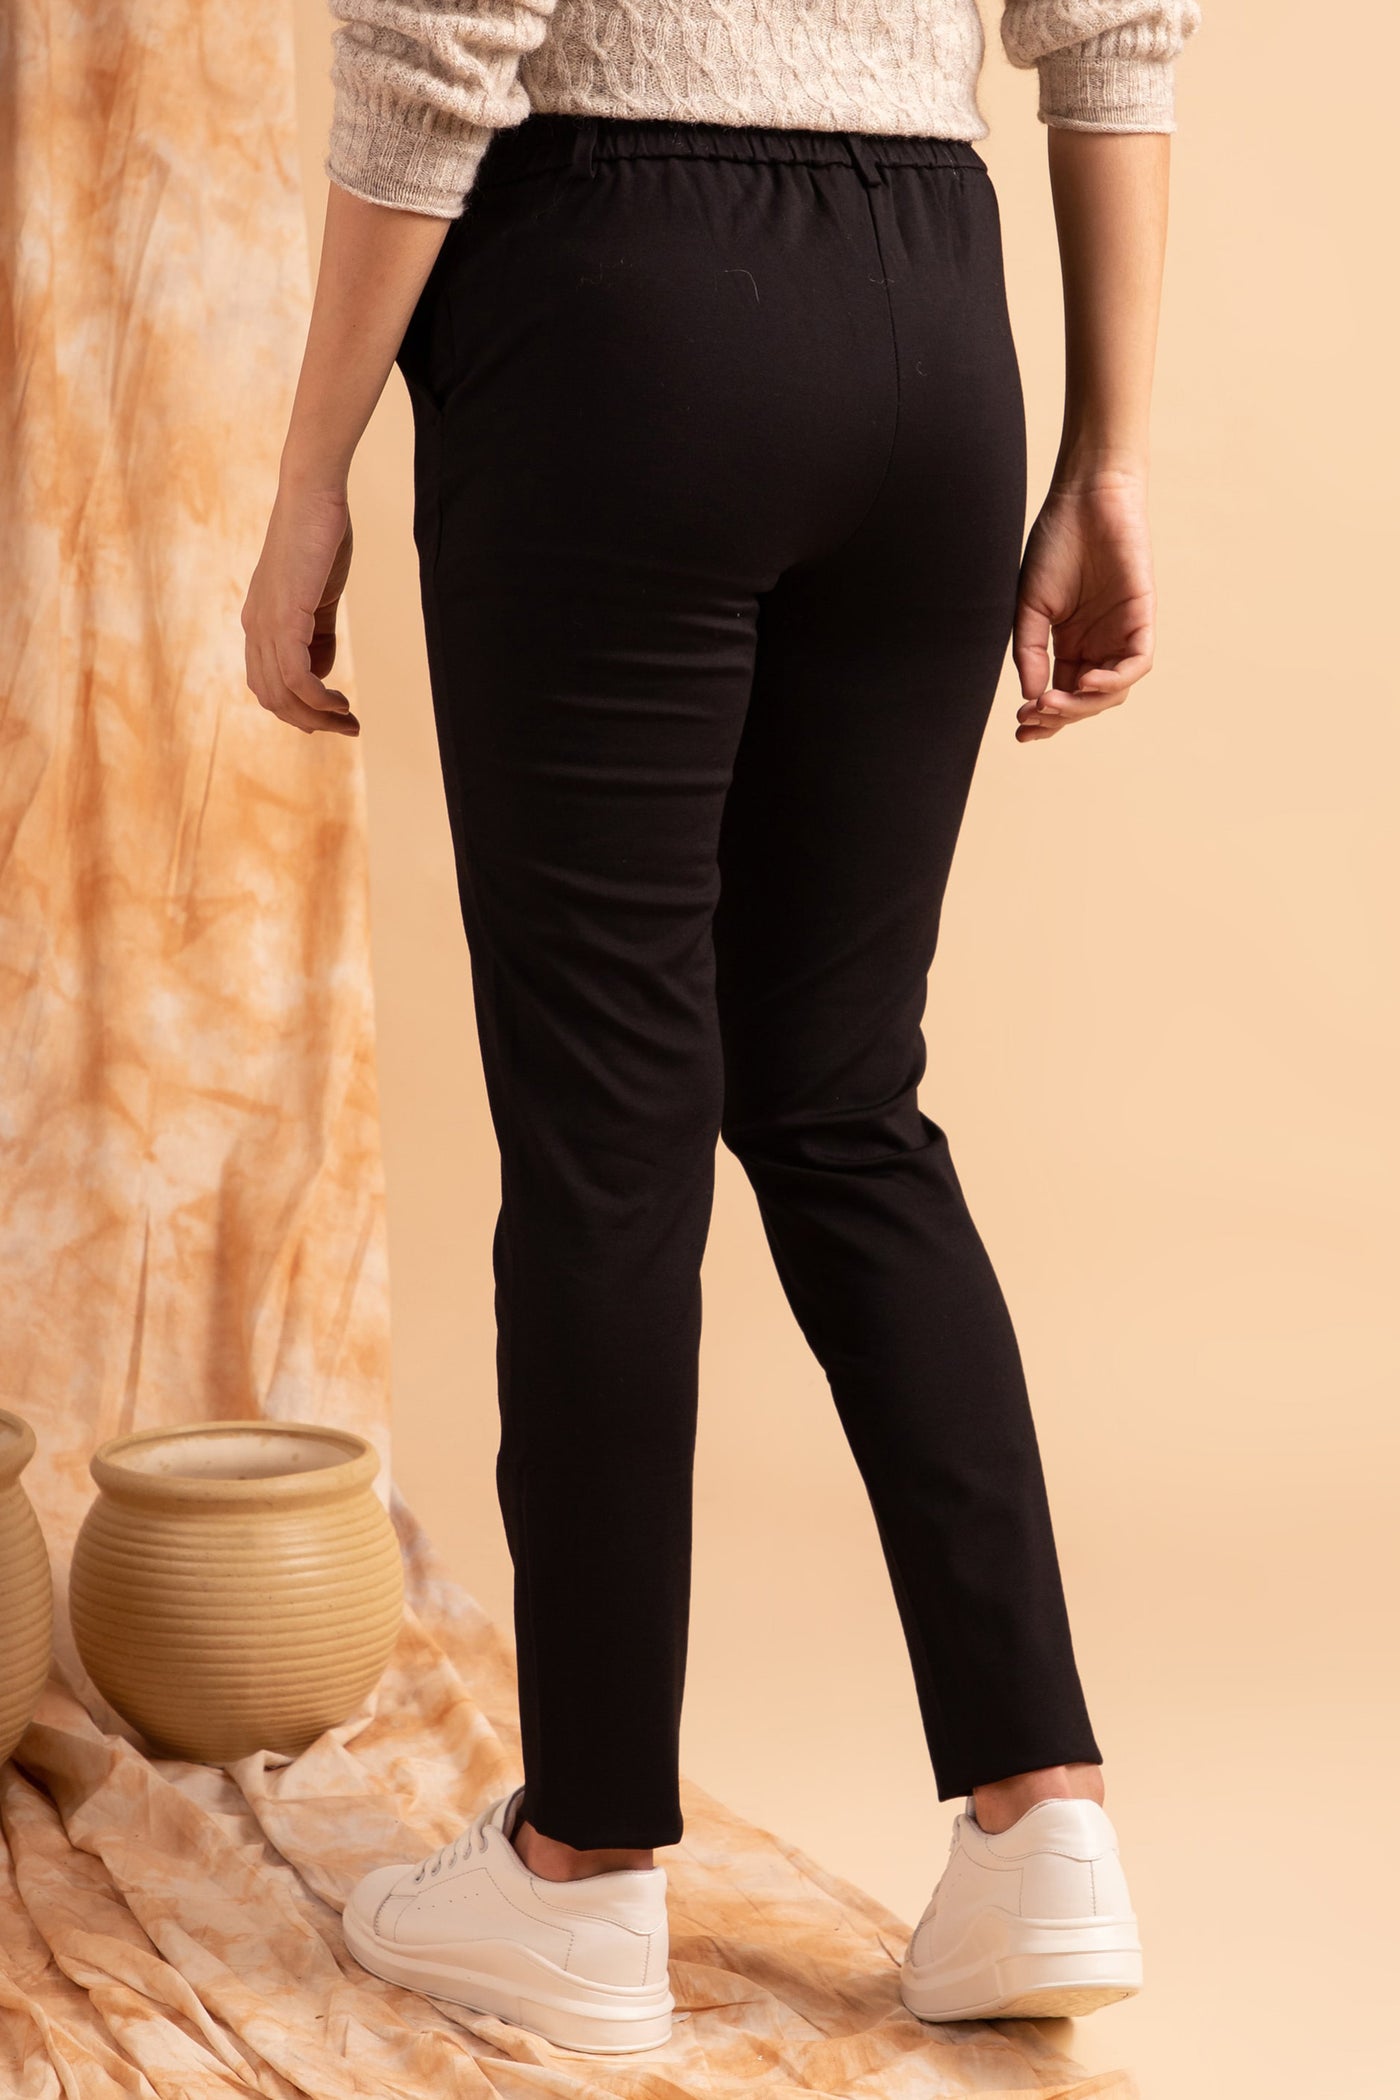 Black Casual Bottoms